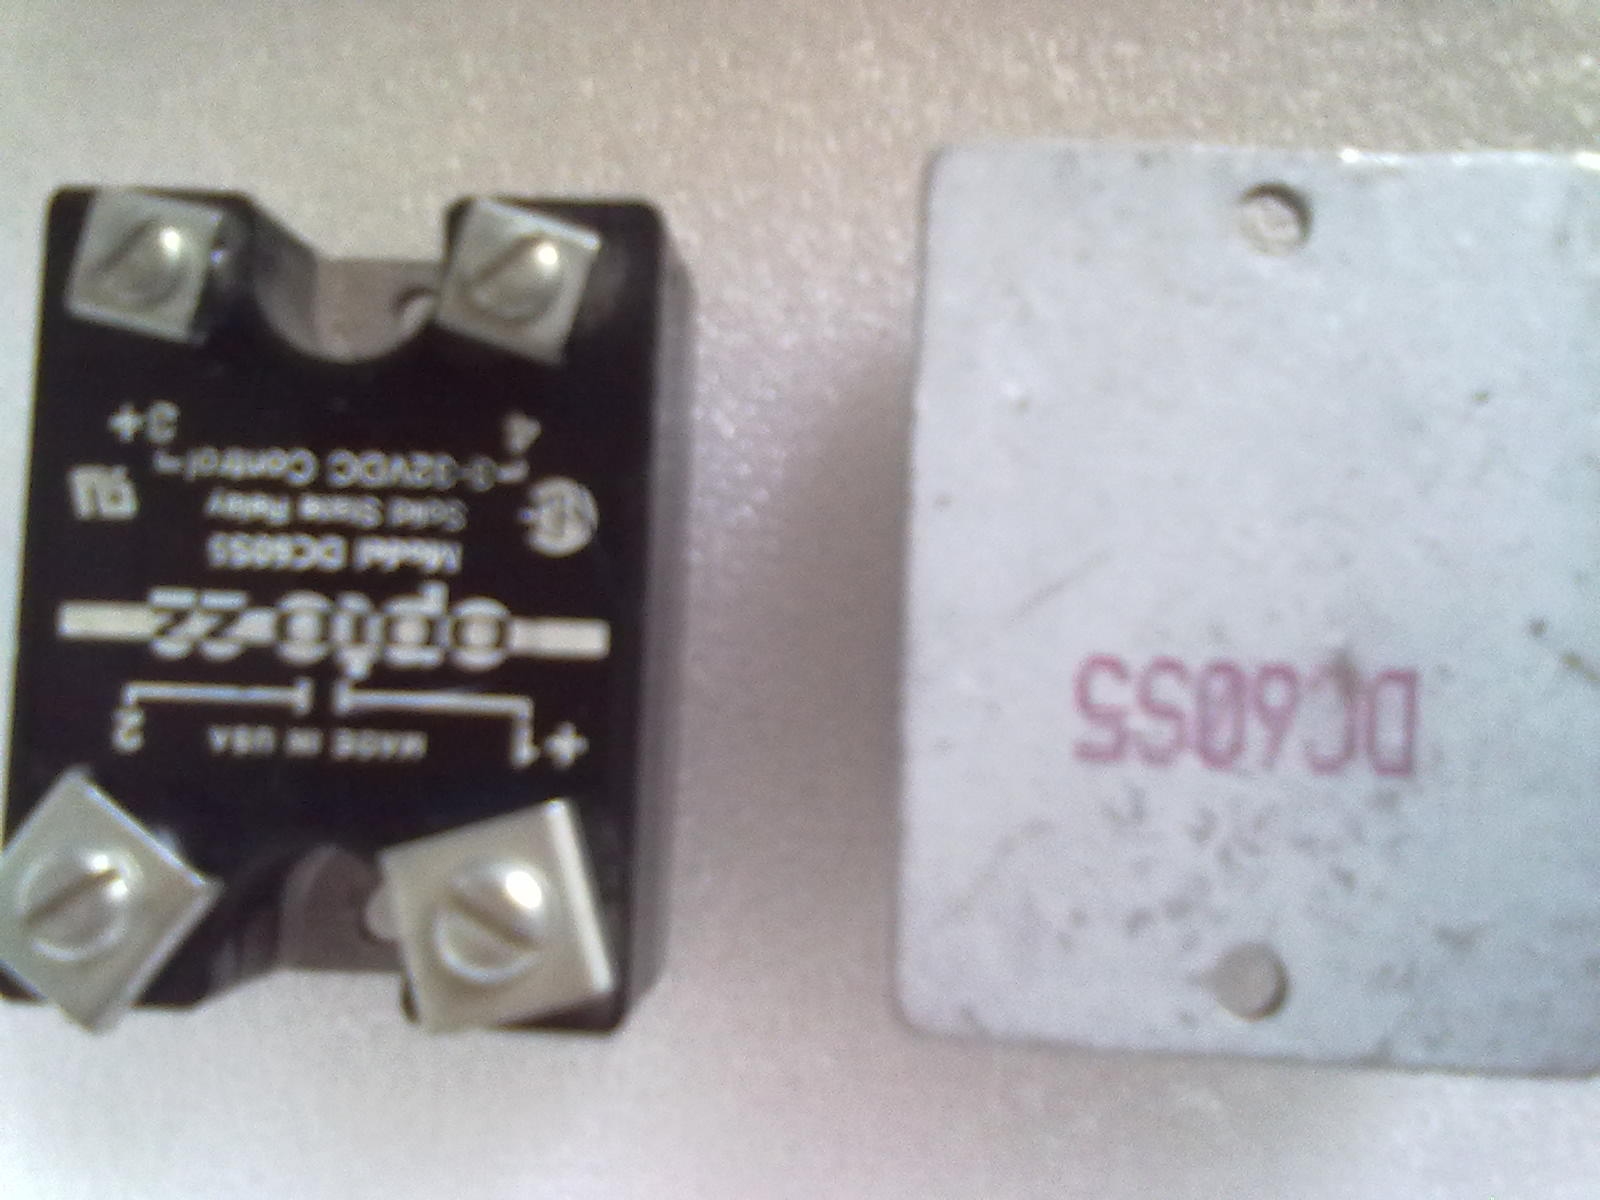 OPTO22 DC60S5 Solid state